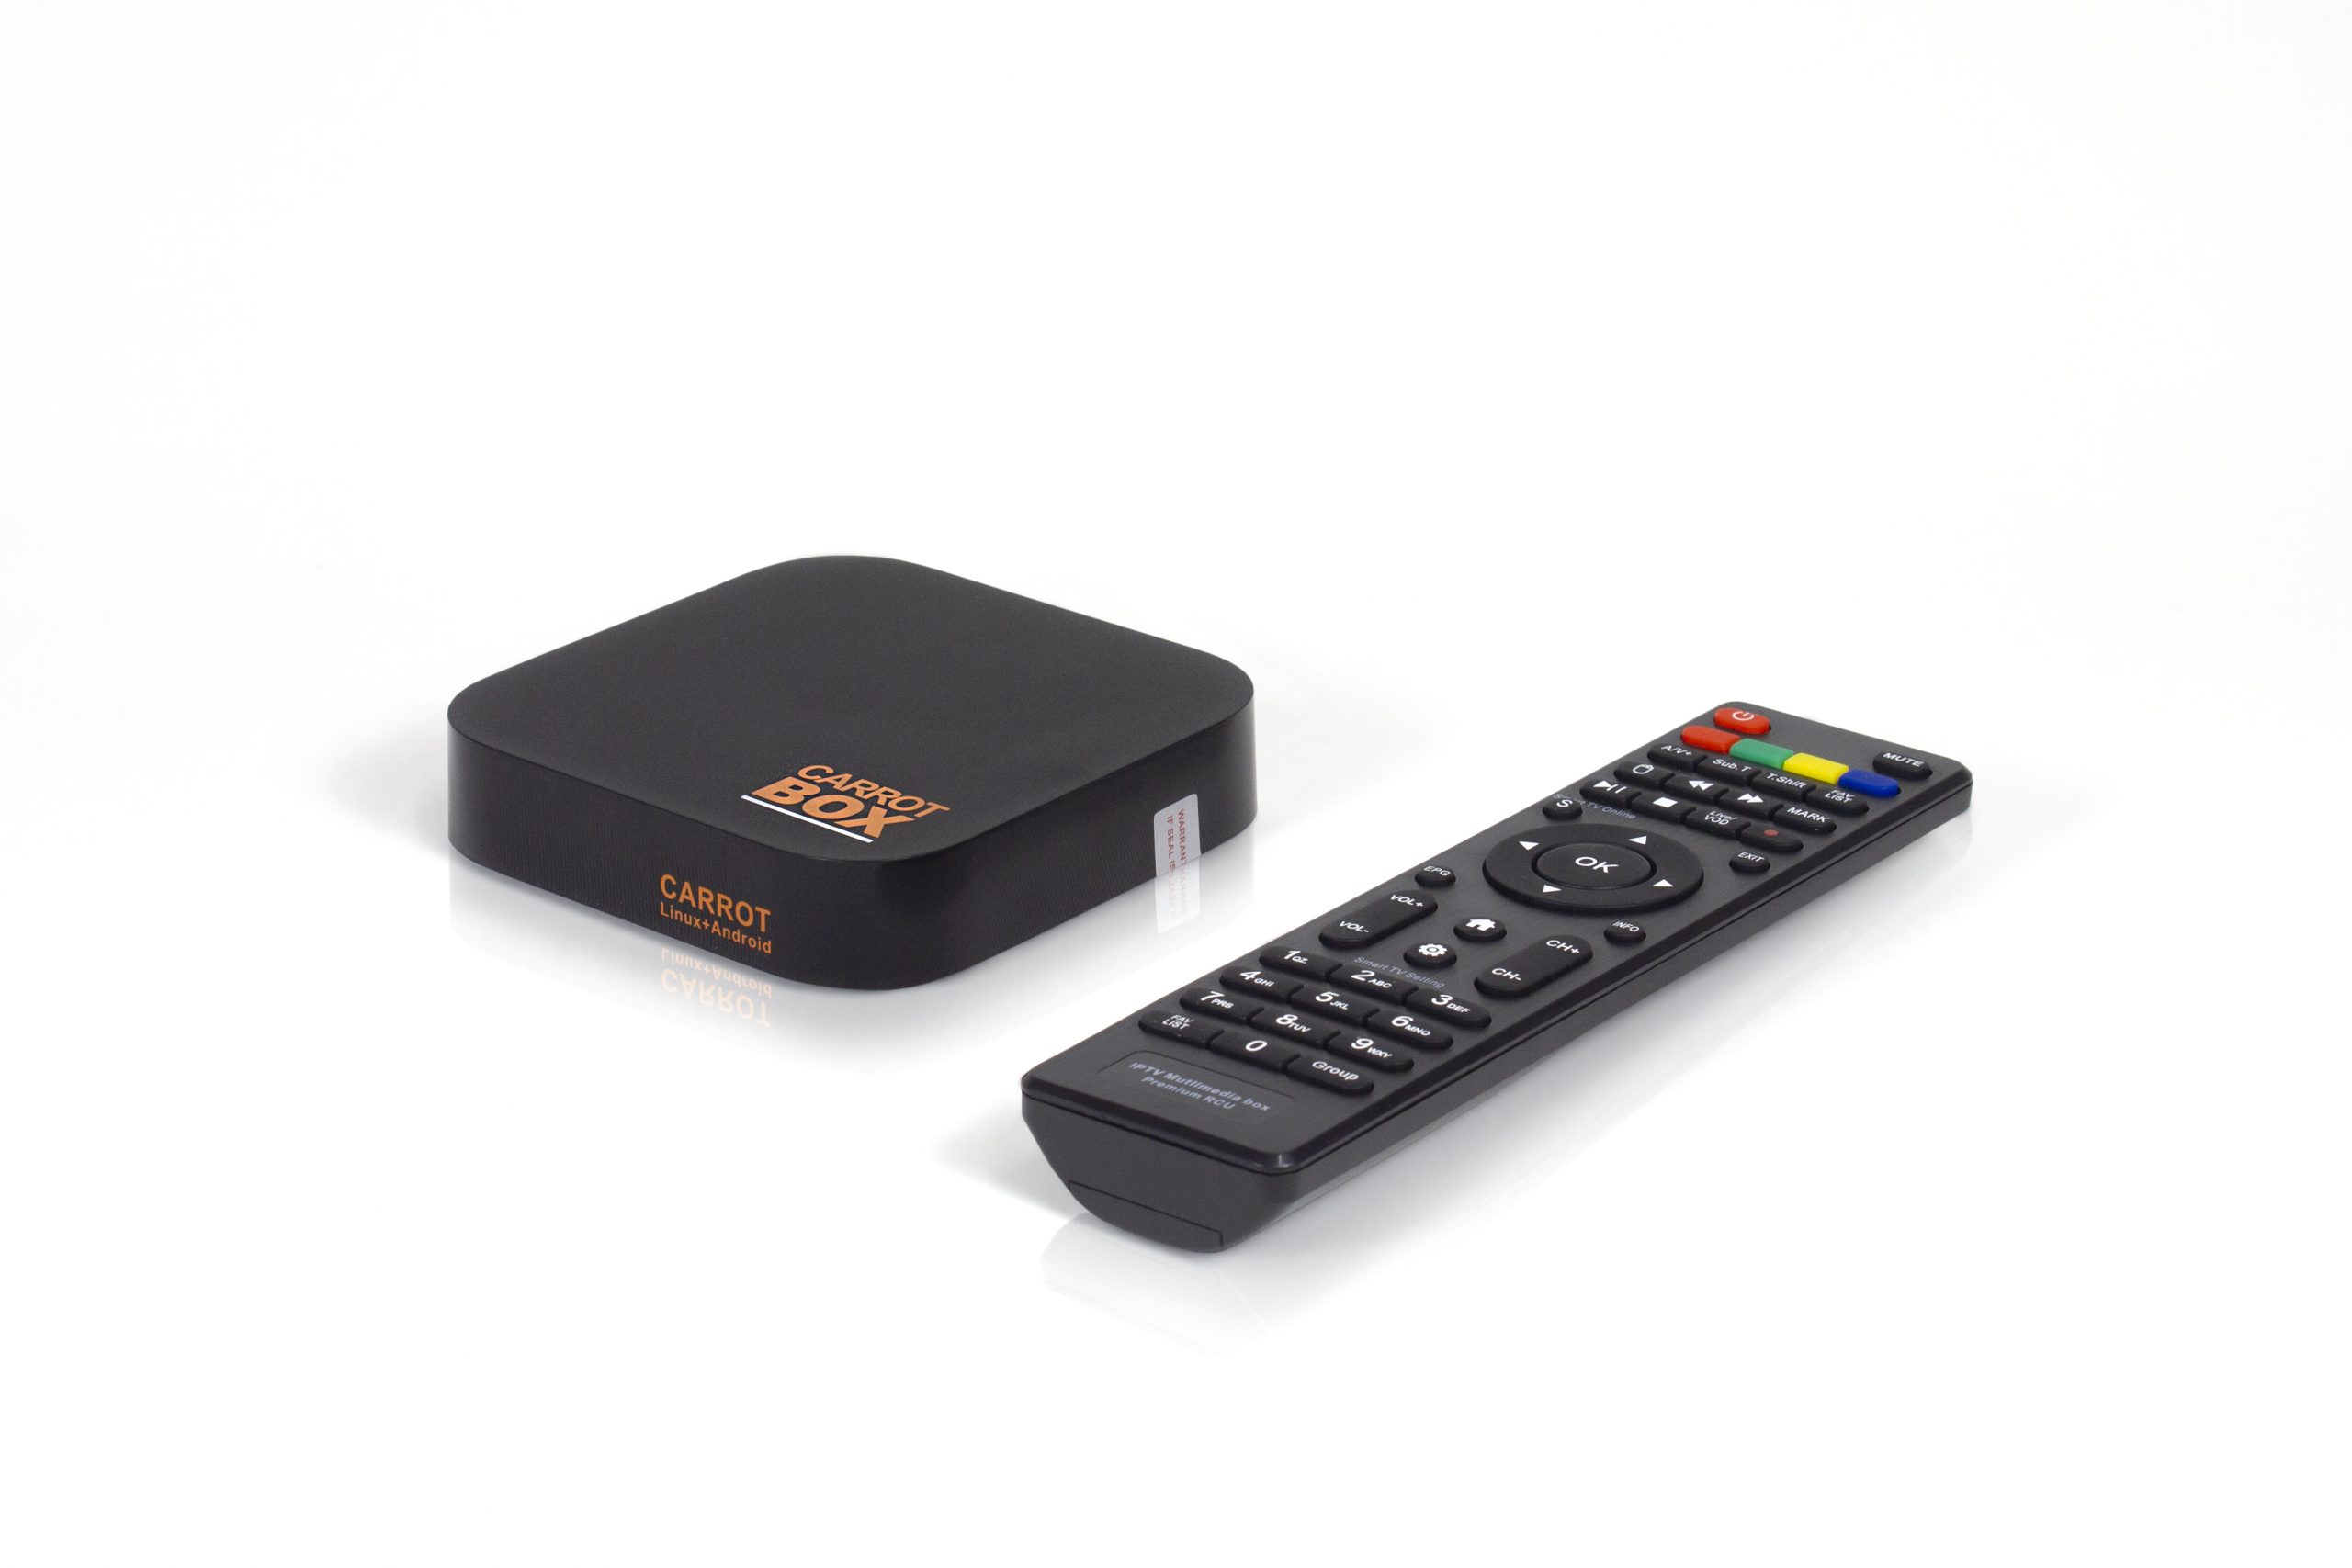 CARROT BOX device with remote